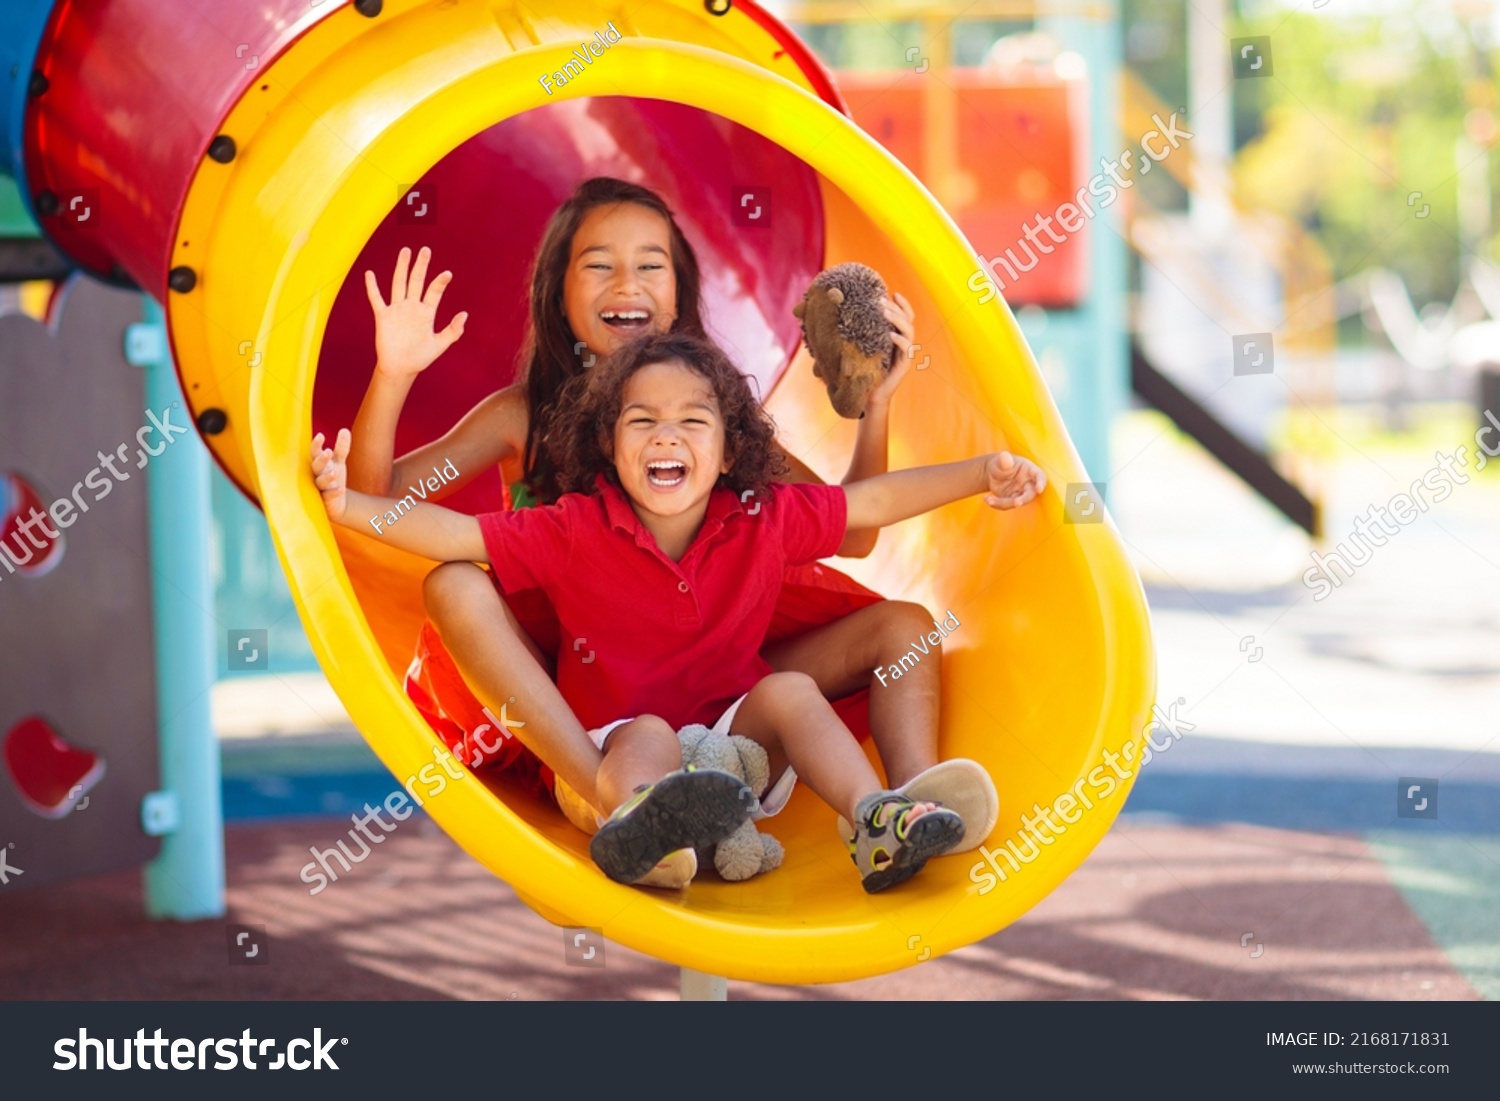 Kids on playground. Children play outdoor on school yard slide. Healthy activity. Summer vacation fun. Child playing in sunny park. Kid having fun on colorful slide. #2168171831